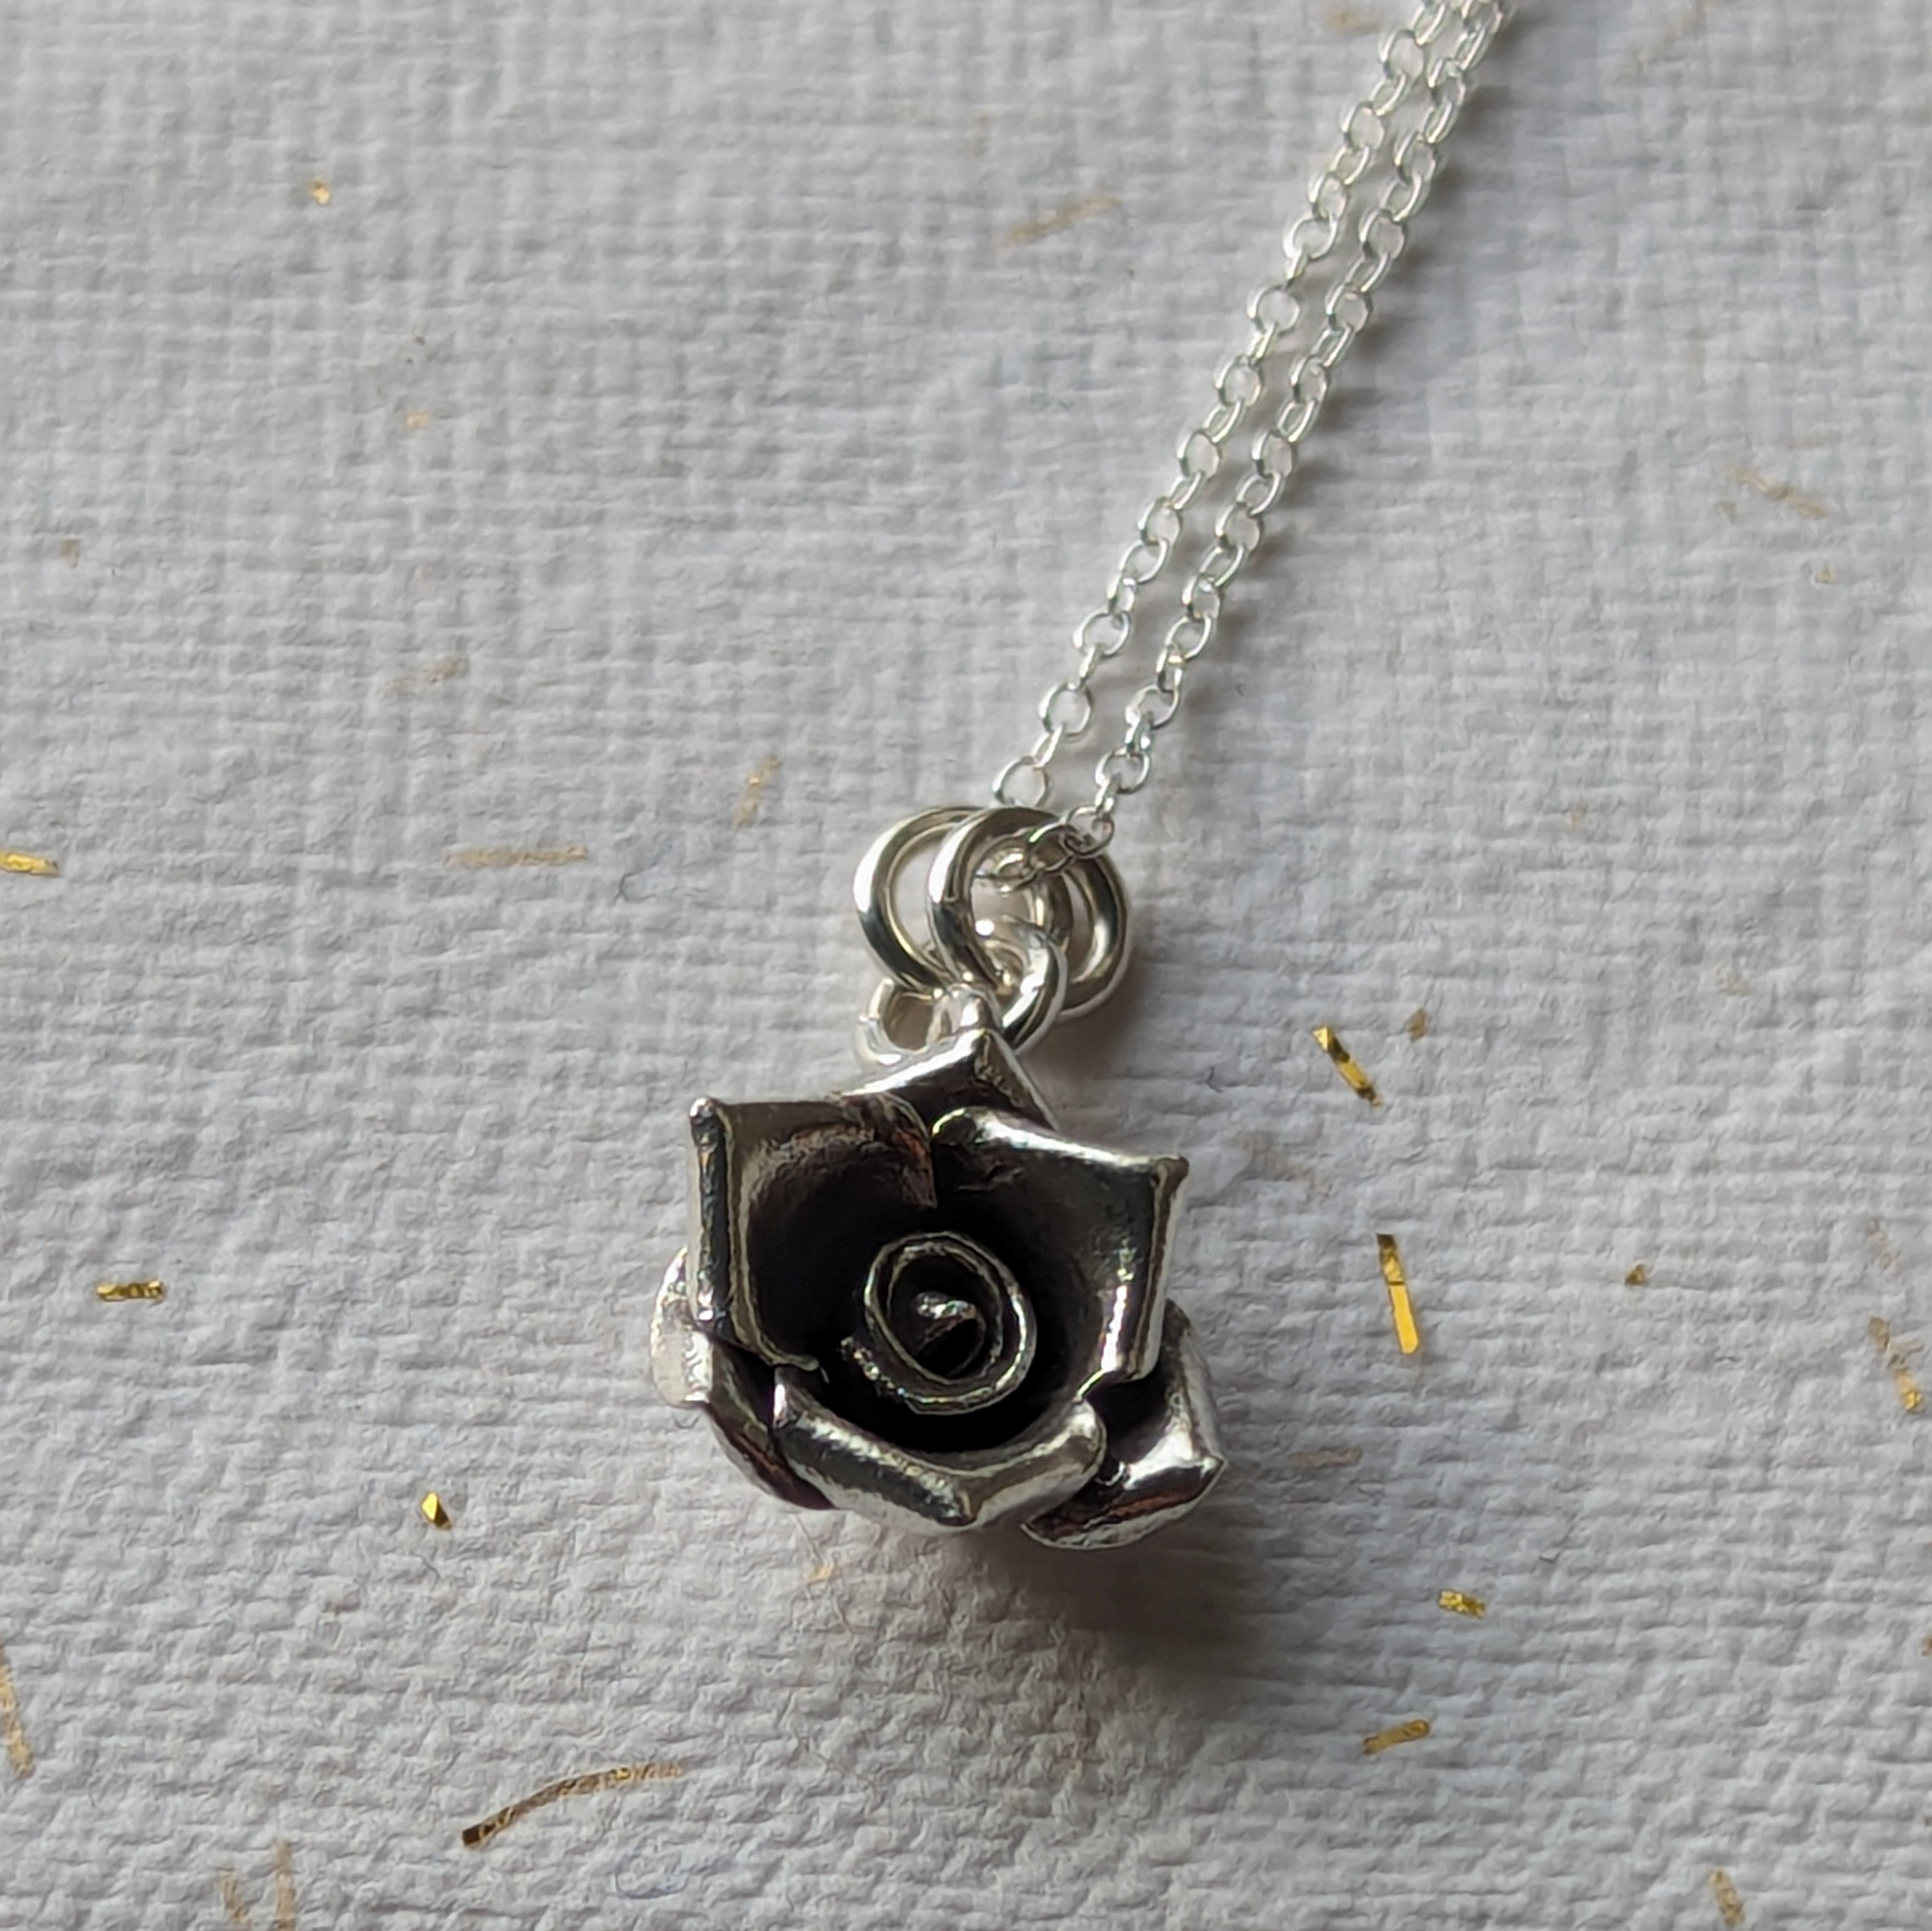 N111 Talia Rose Pendant Necklace. Rose shaped pendant hanging on a sterling silver chain, created from recycled fine silver. Ethically created and Fair Trade.